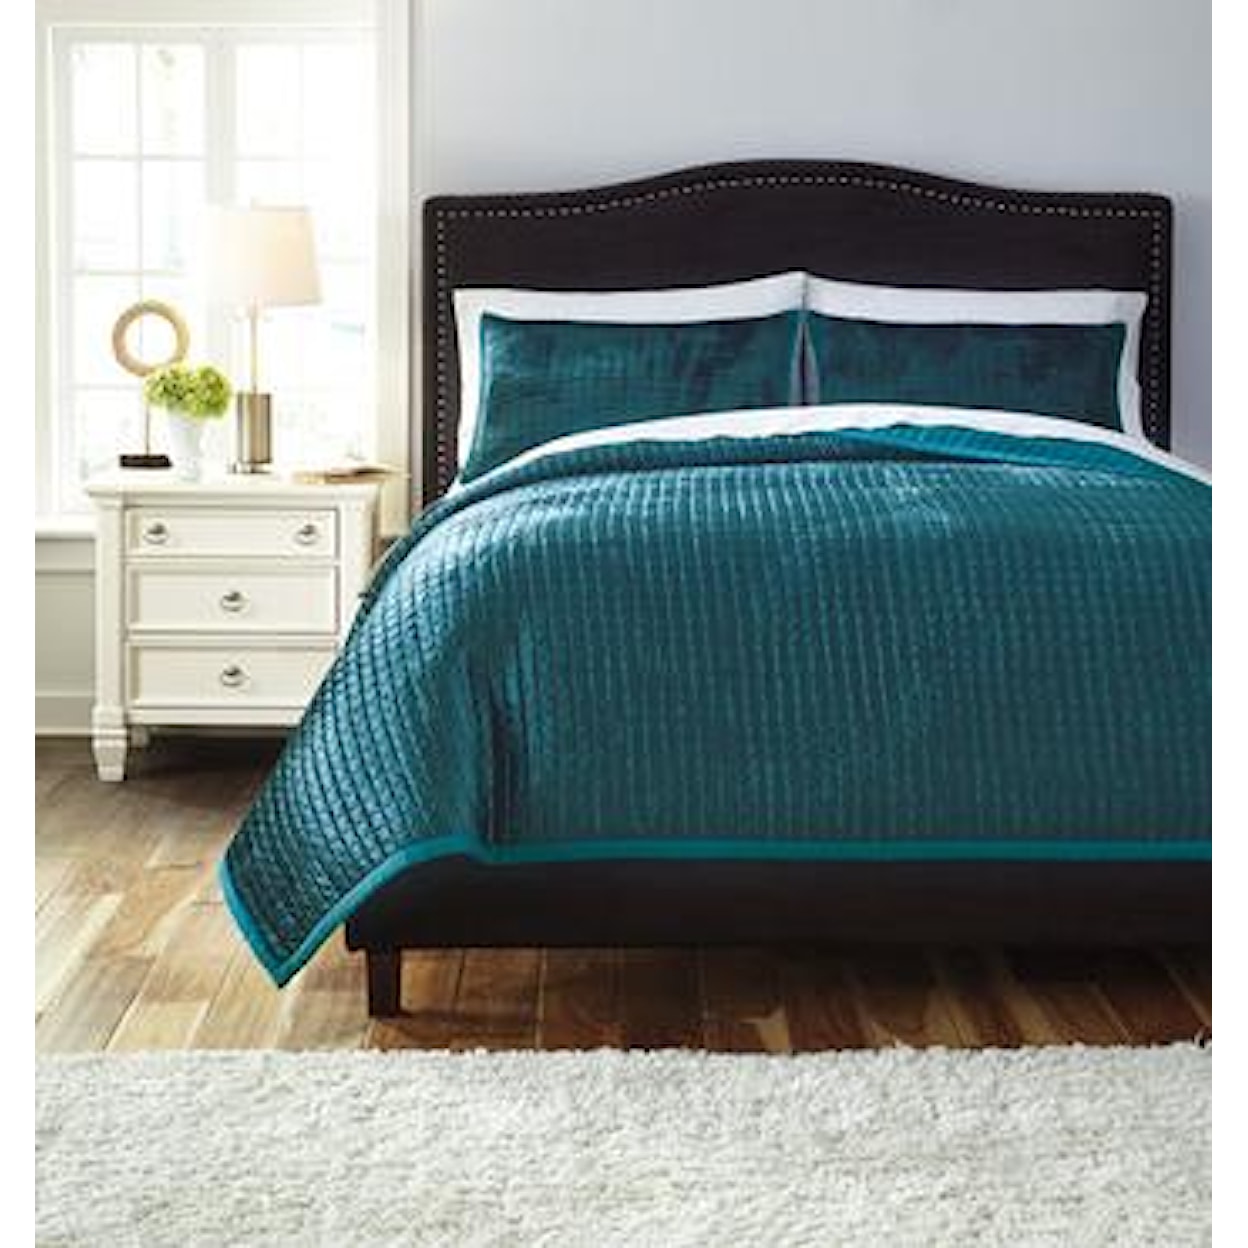 Signature Design by Ashley Furniture Bedding Sets Queen Stitched Peacock Comforter Set